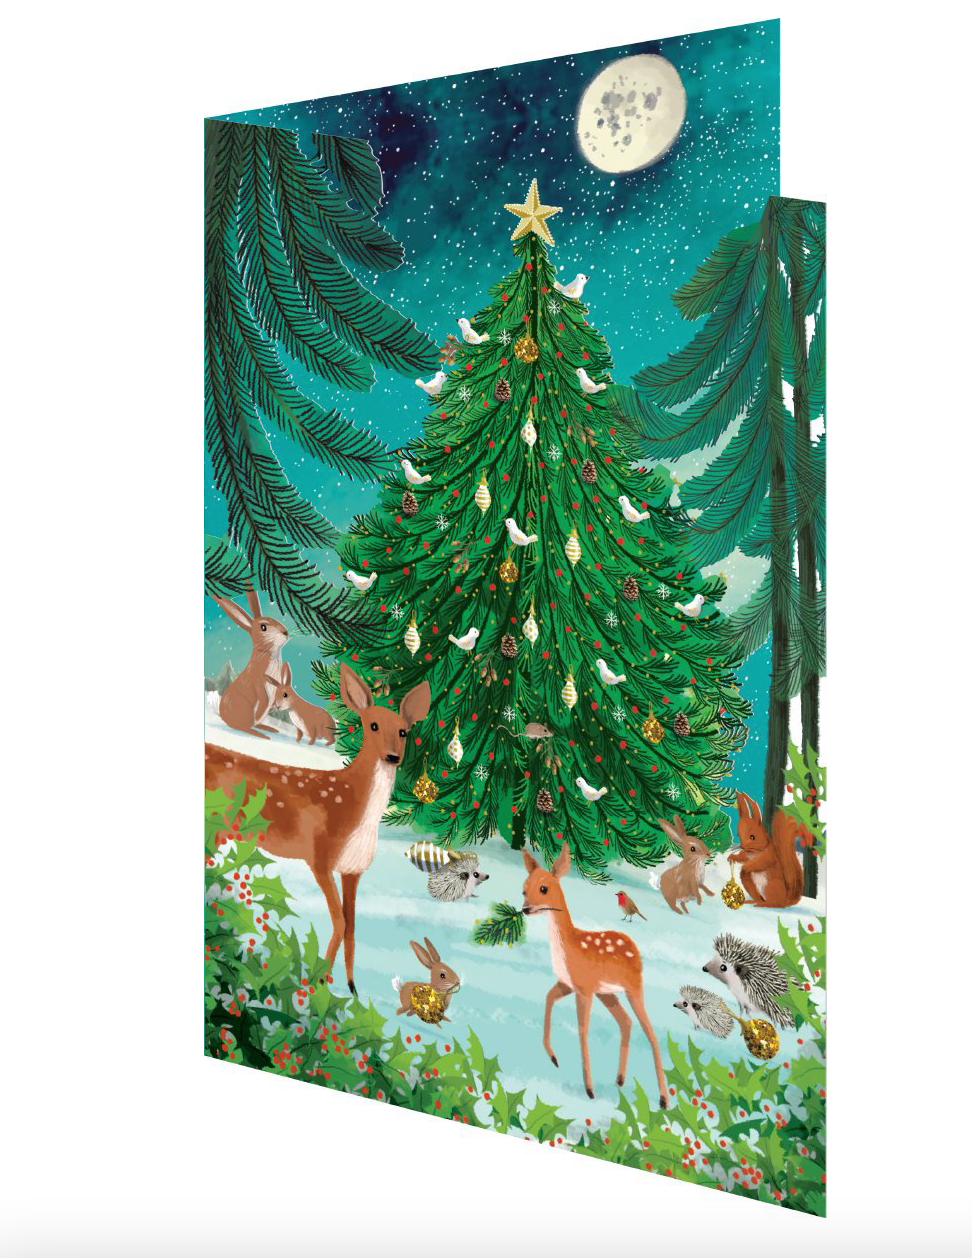 Heart of the Forest Lasercut Christmas Card by Jane Newland GCX990